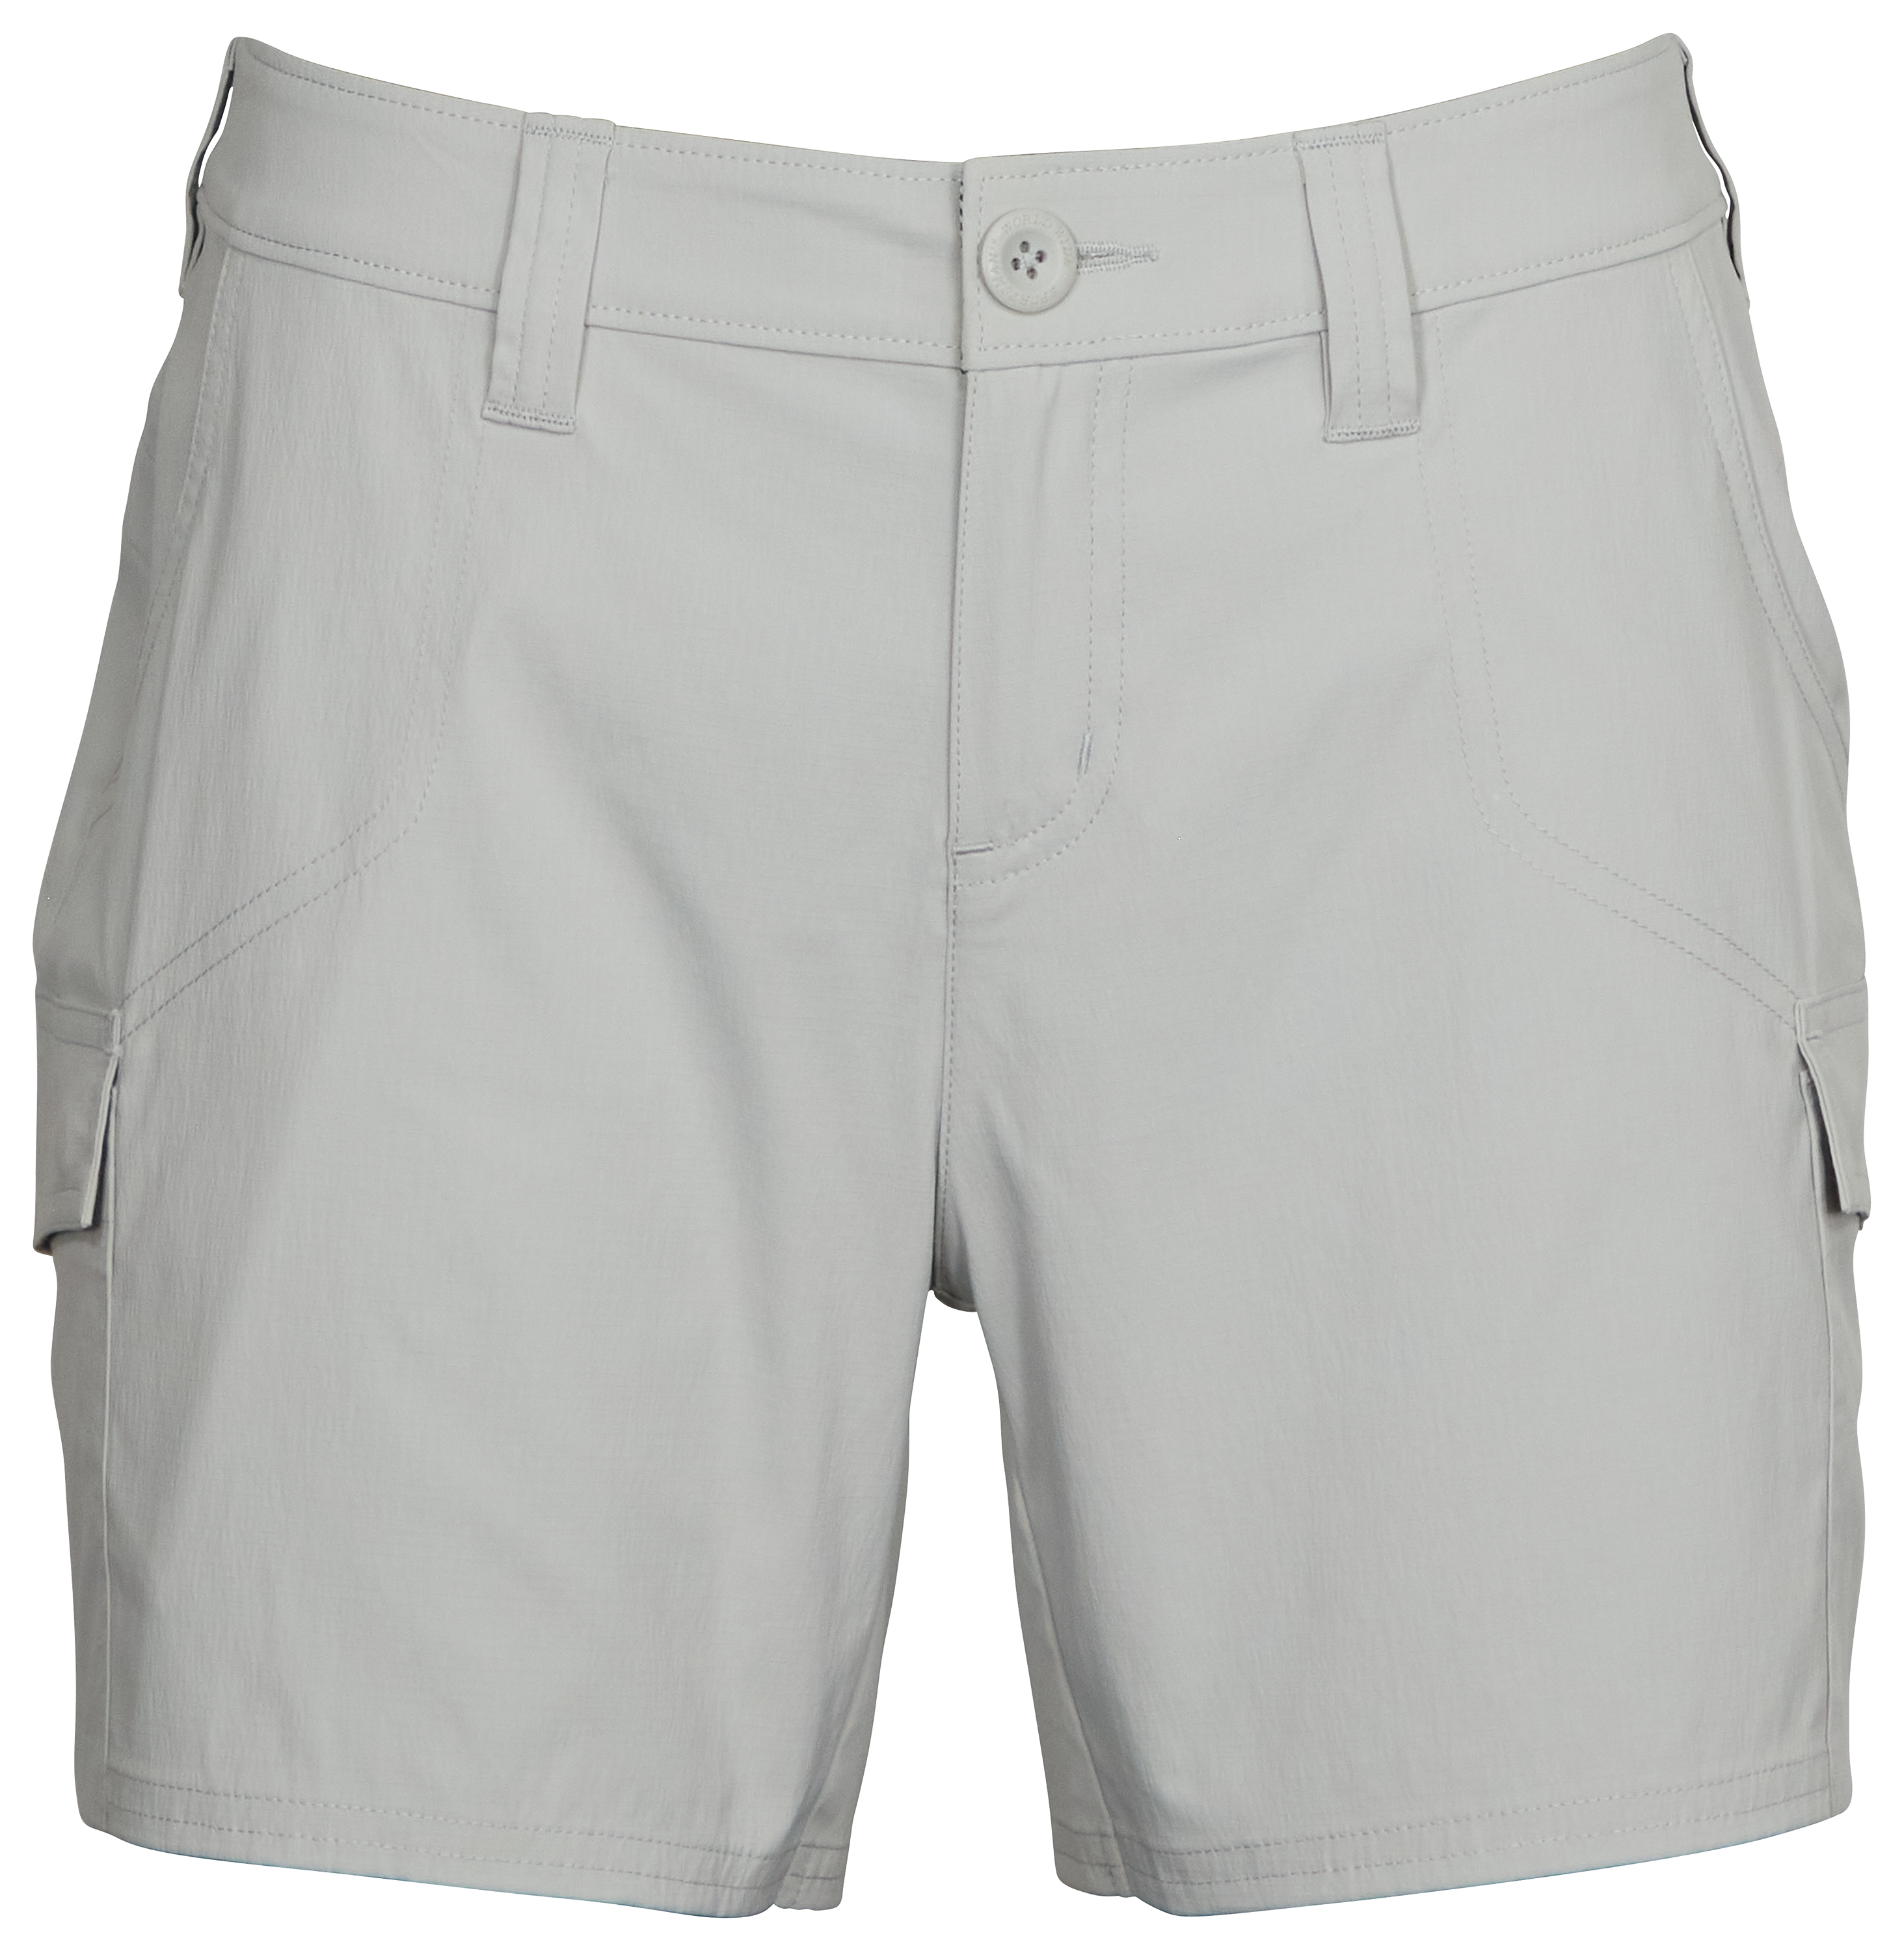 World Wide Sportsman Ripstop Cargo Shorts for Ladies - High Rise - 8